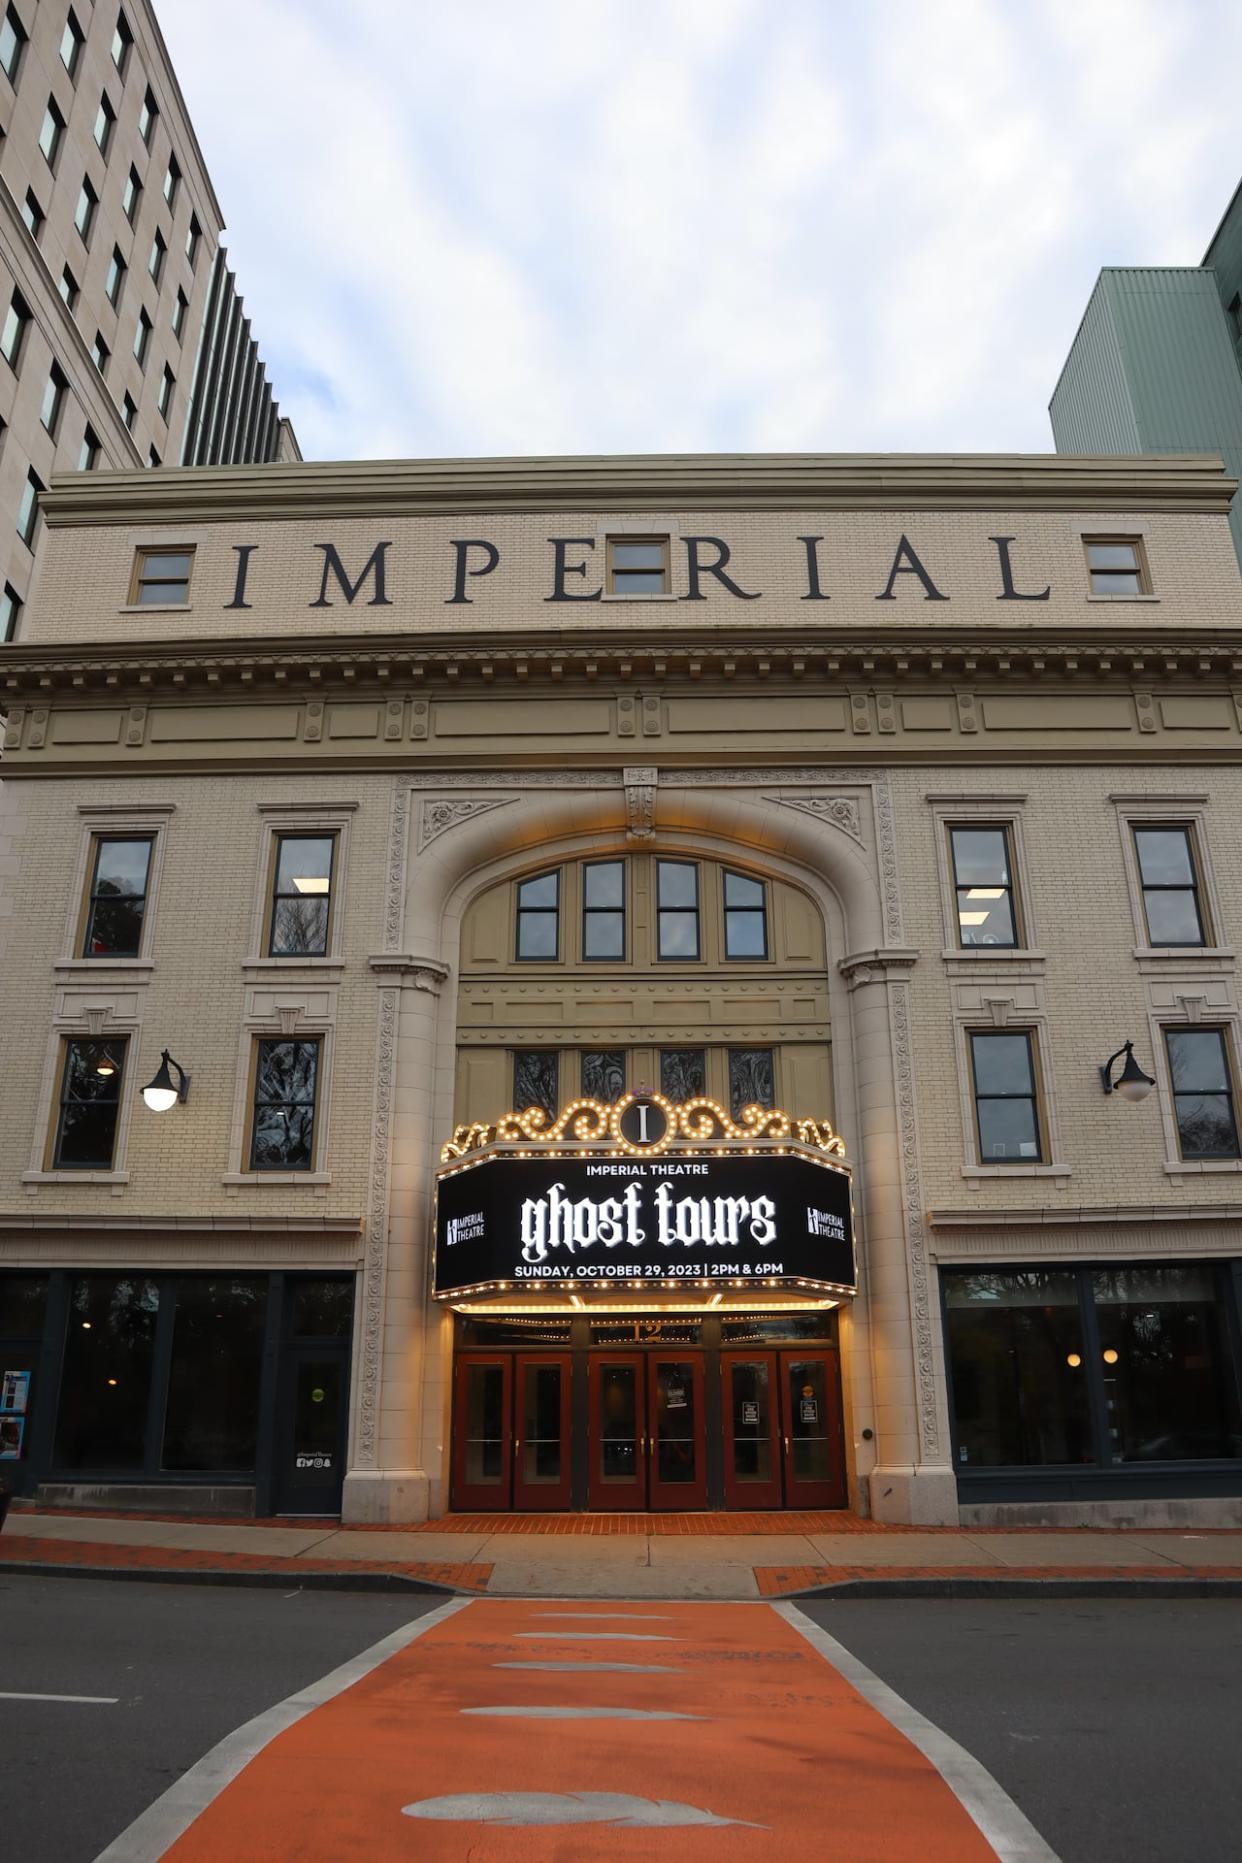 Along with local or regional artists, the Imperial Theatre also wants to host acts as big as possible for the size of the theatre.  (Submitted by the Imperial Theatre - image credit)